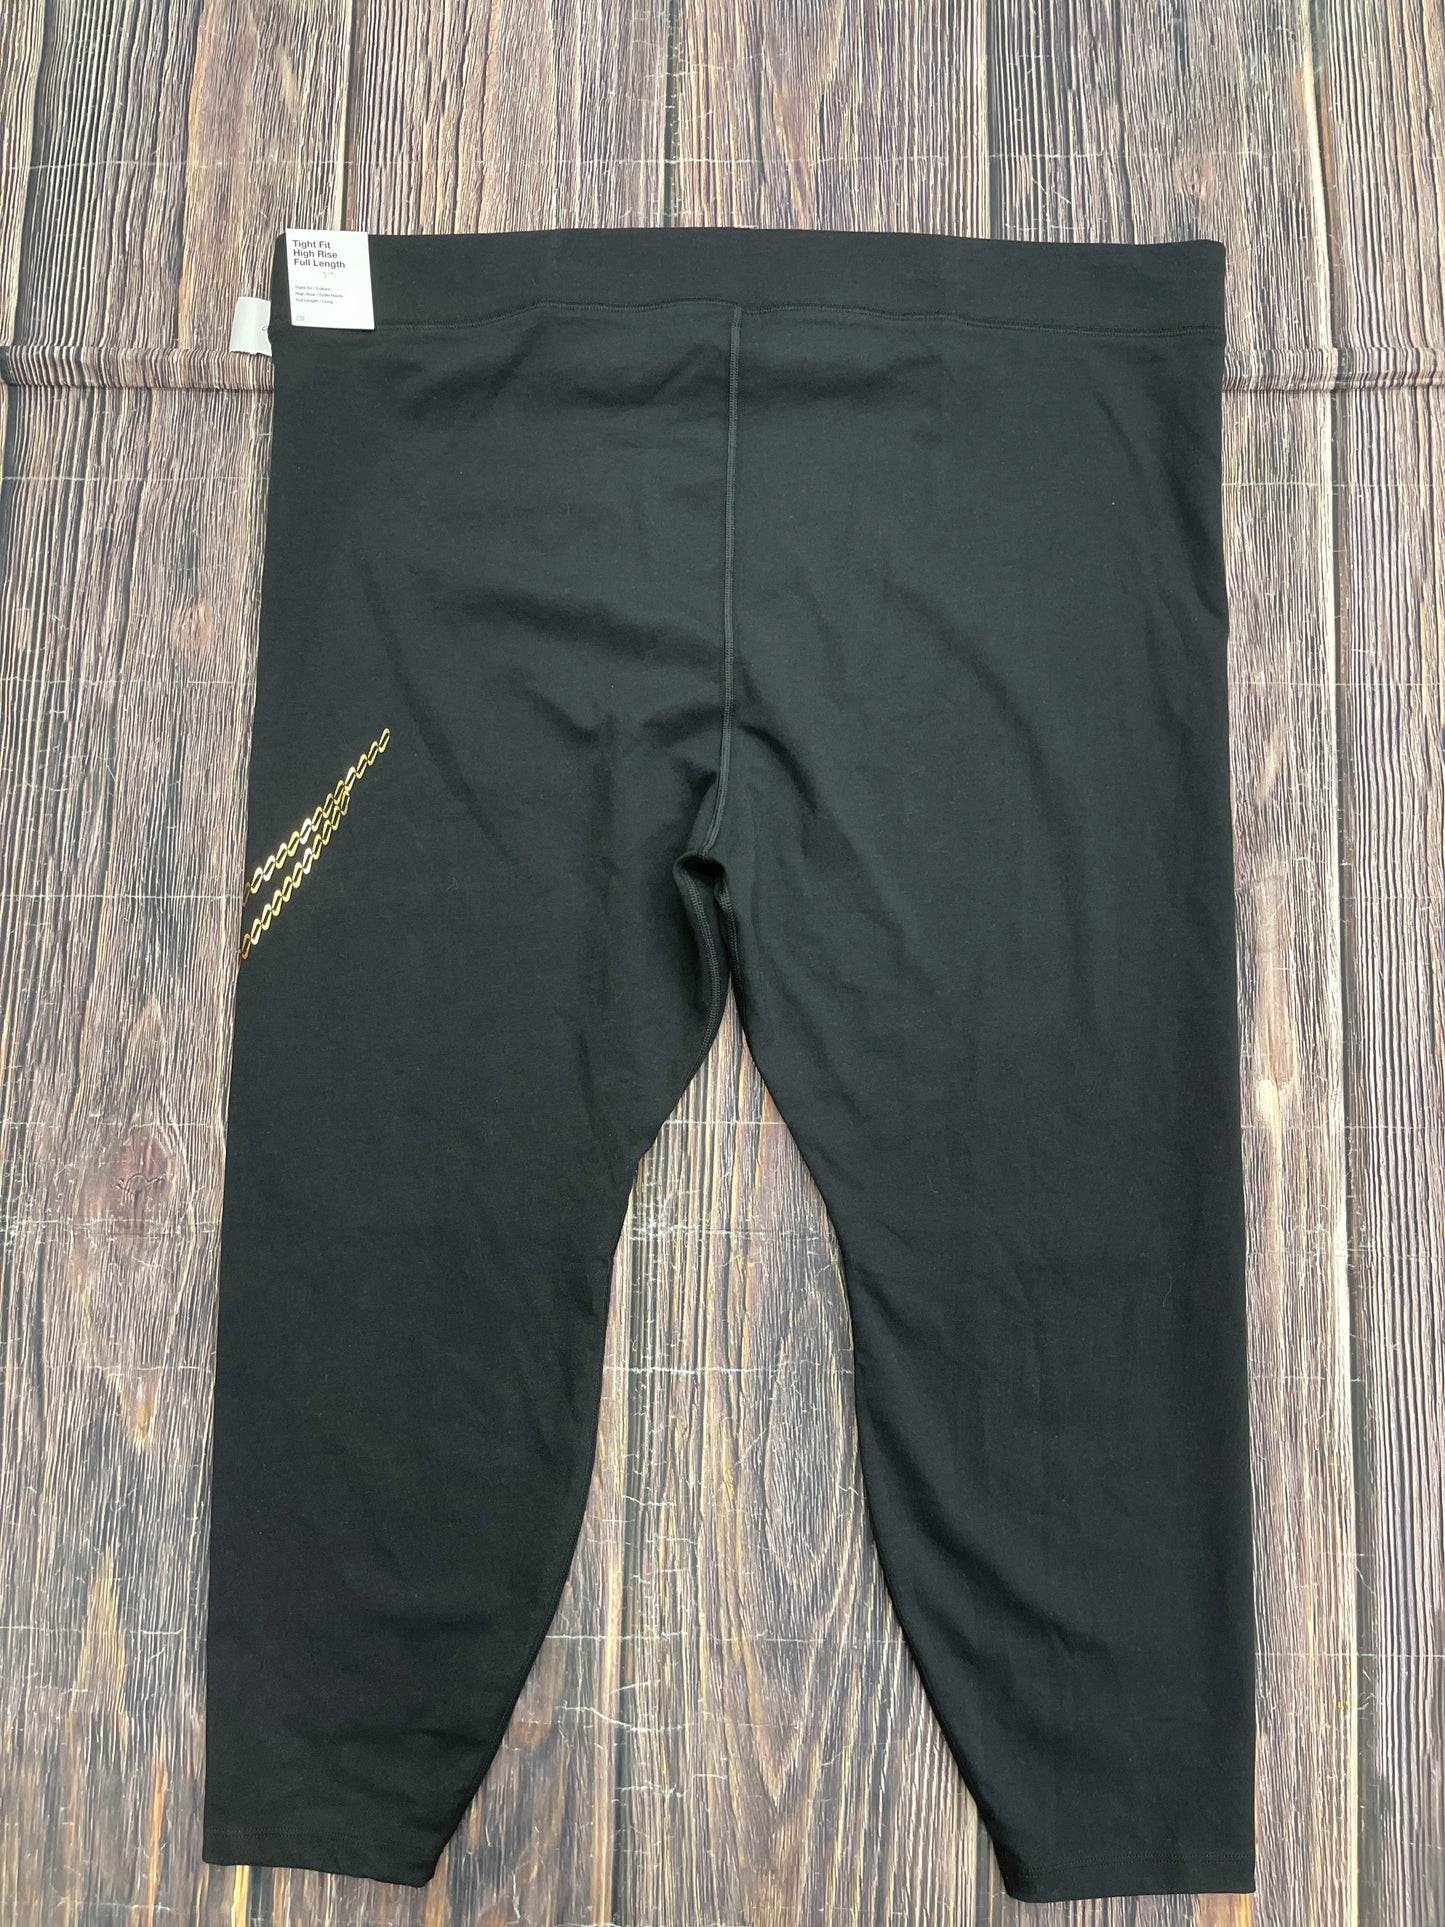 Athletic Leggings By Nike  Size: 3x